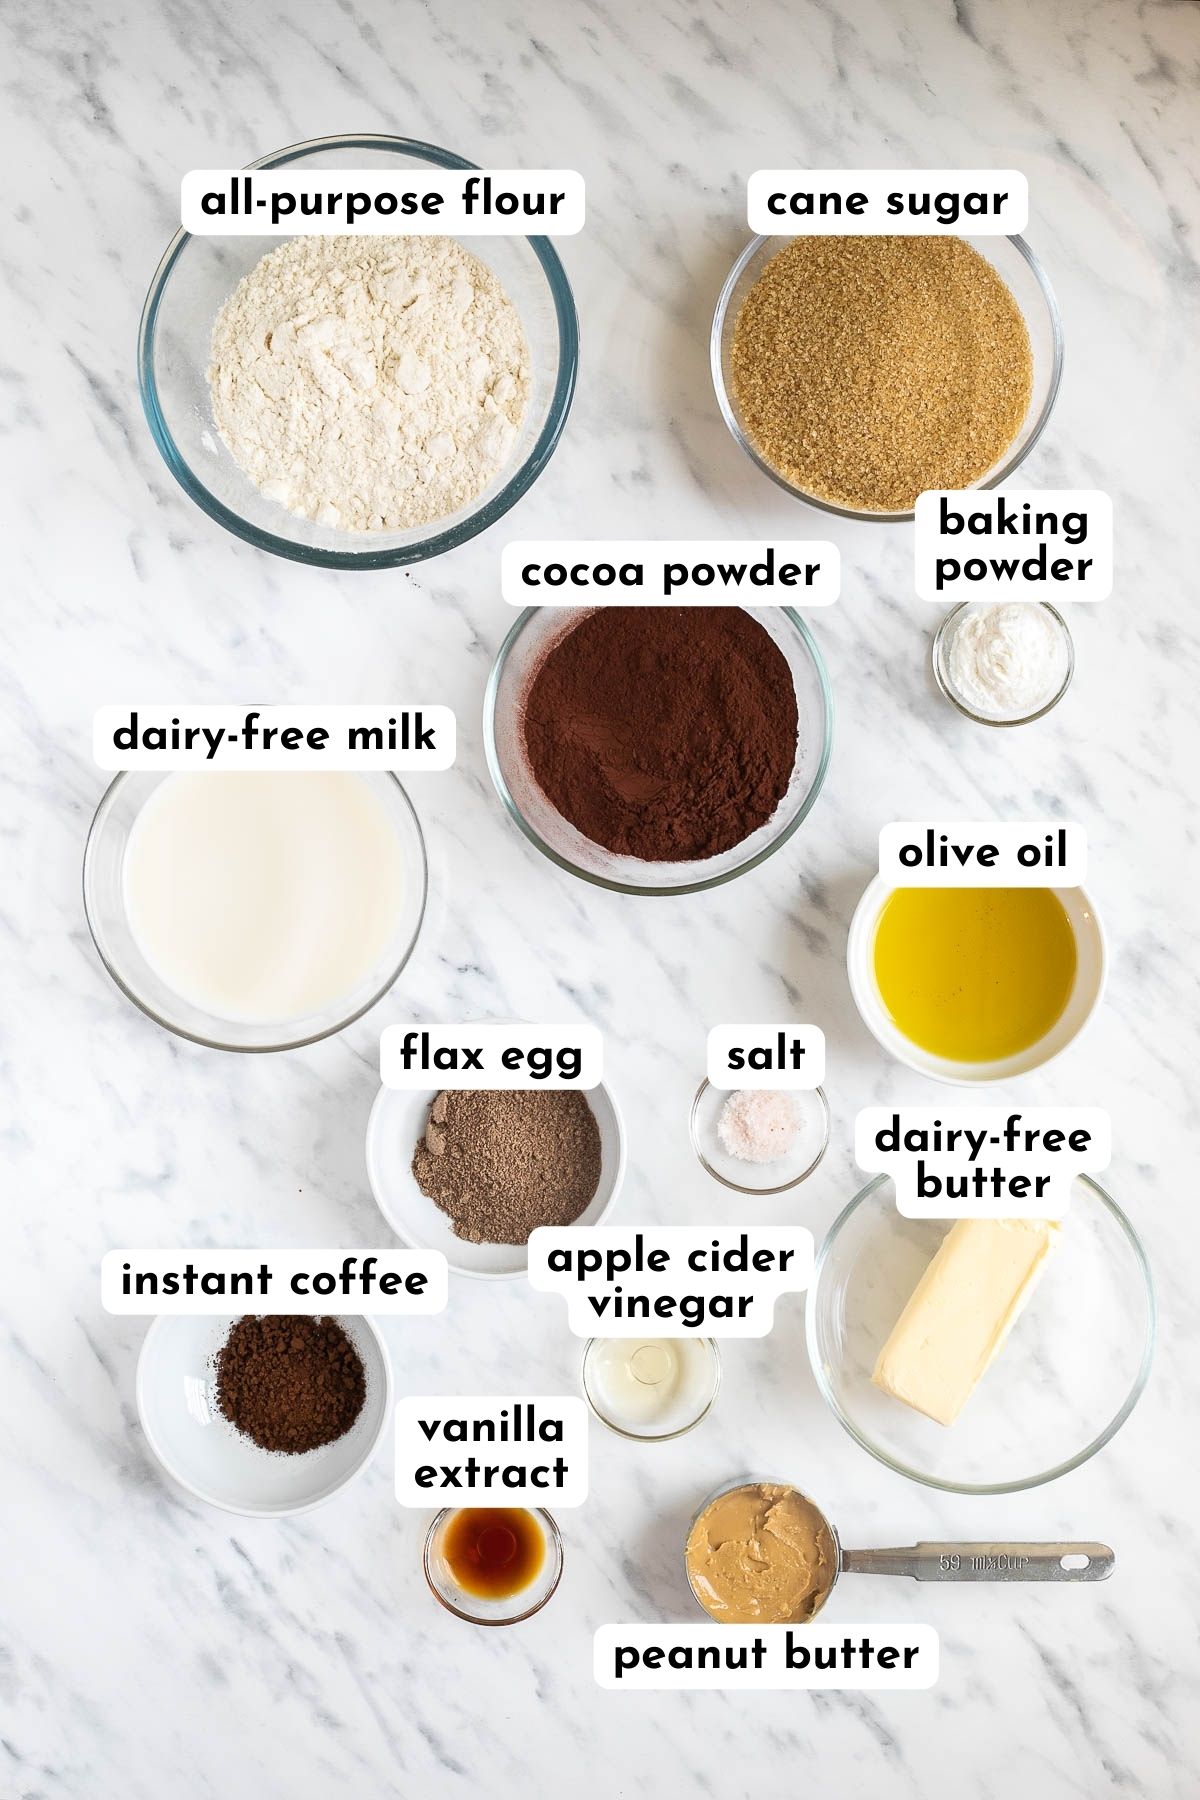 Ingredients of vegan chocolate peanut butter muffins in small glass bowls like flour, sugar, cocoa powder, baking powder, milk, oil, ground flax seeds, instant coffee, stick of butter, vinegar, salt, and peanut butter in a spoon. 